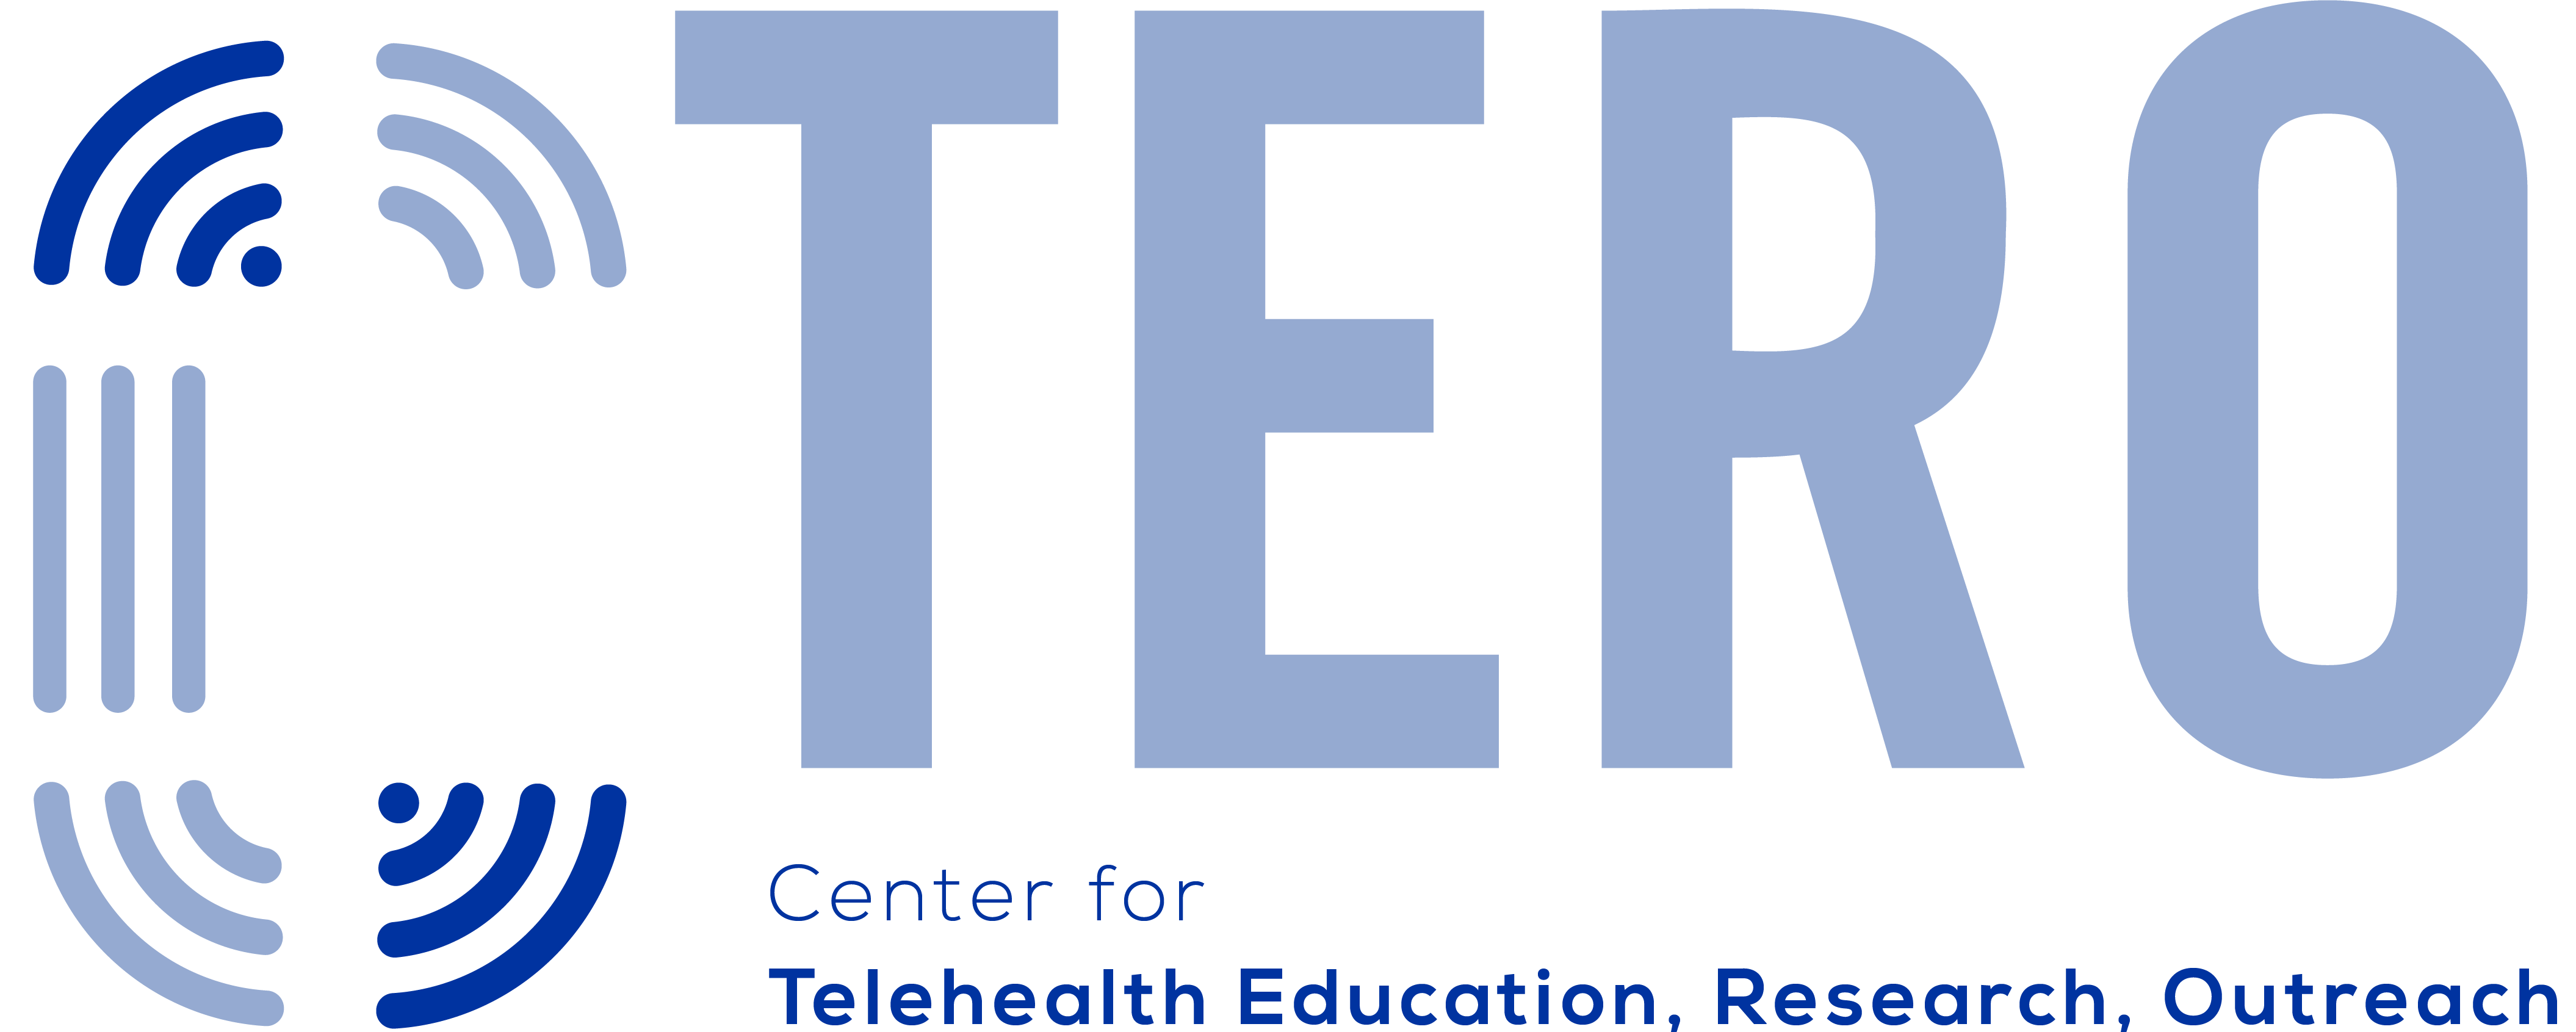 Center for Telehealth Education, Research, and Outreach